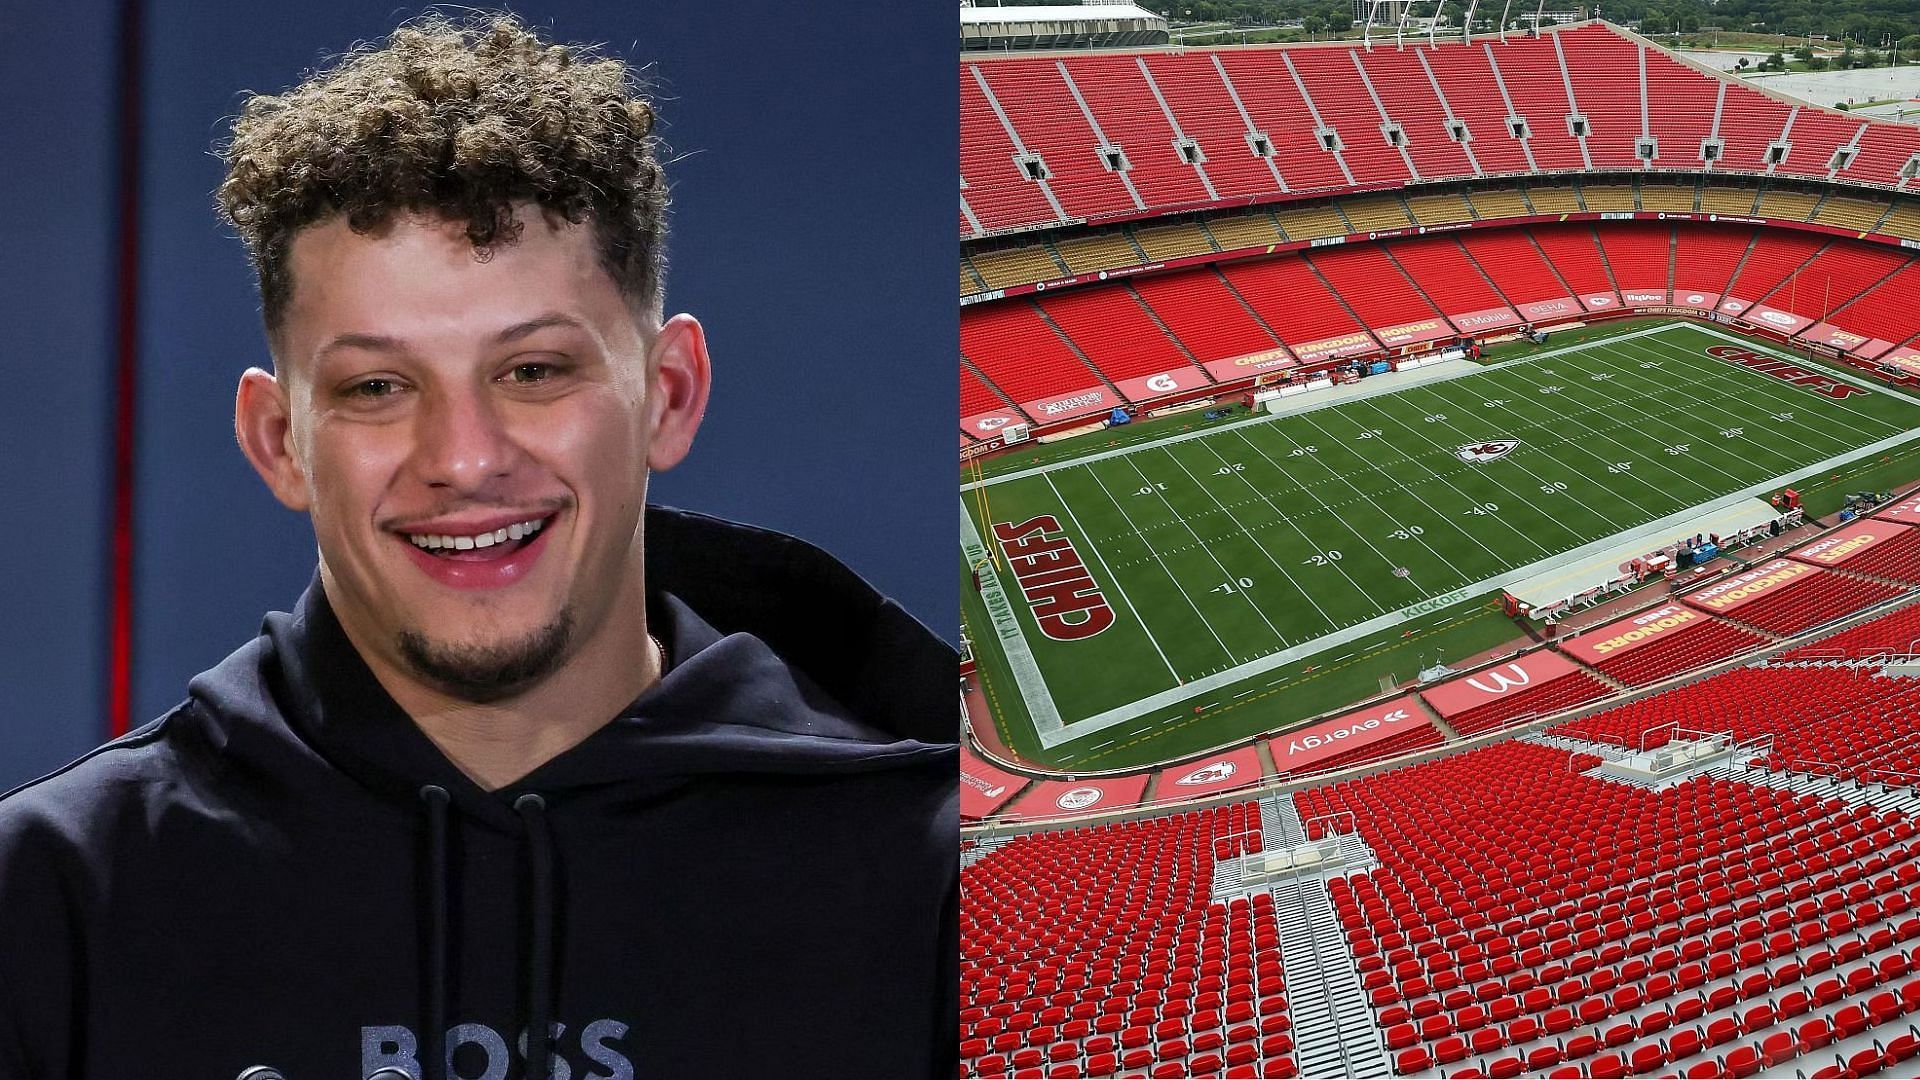 Patrick Mahomes and the Kansas City Chiefs could transfer to a new home base